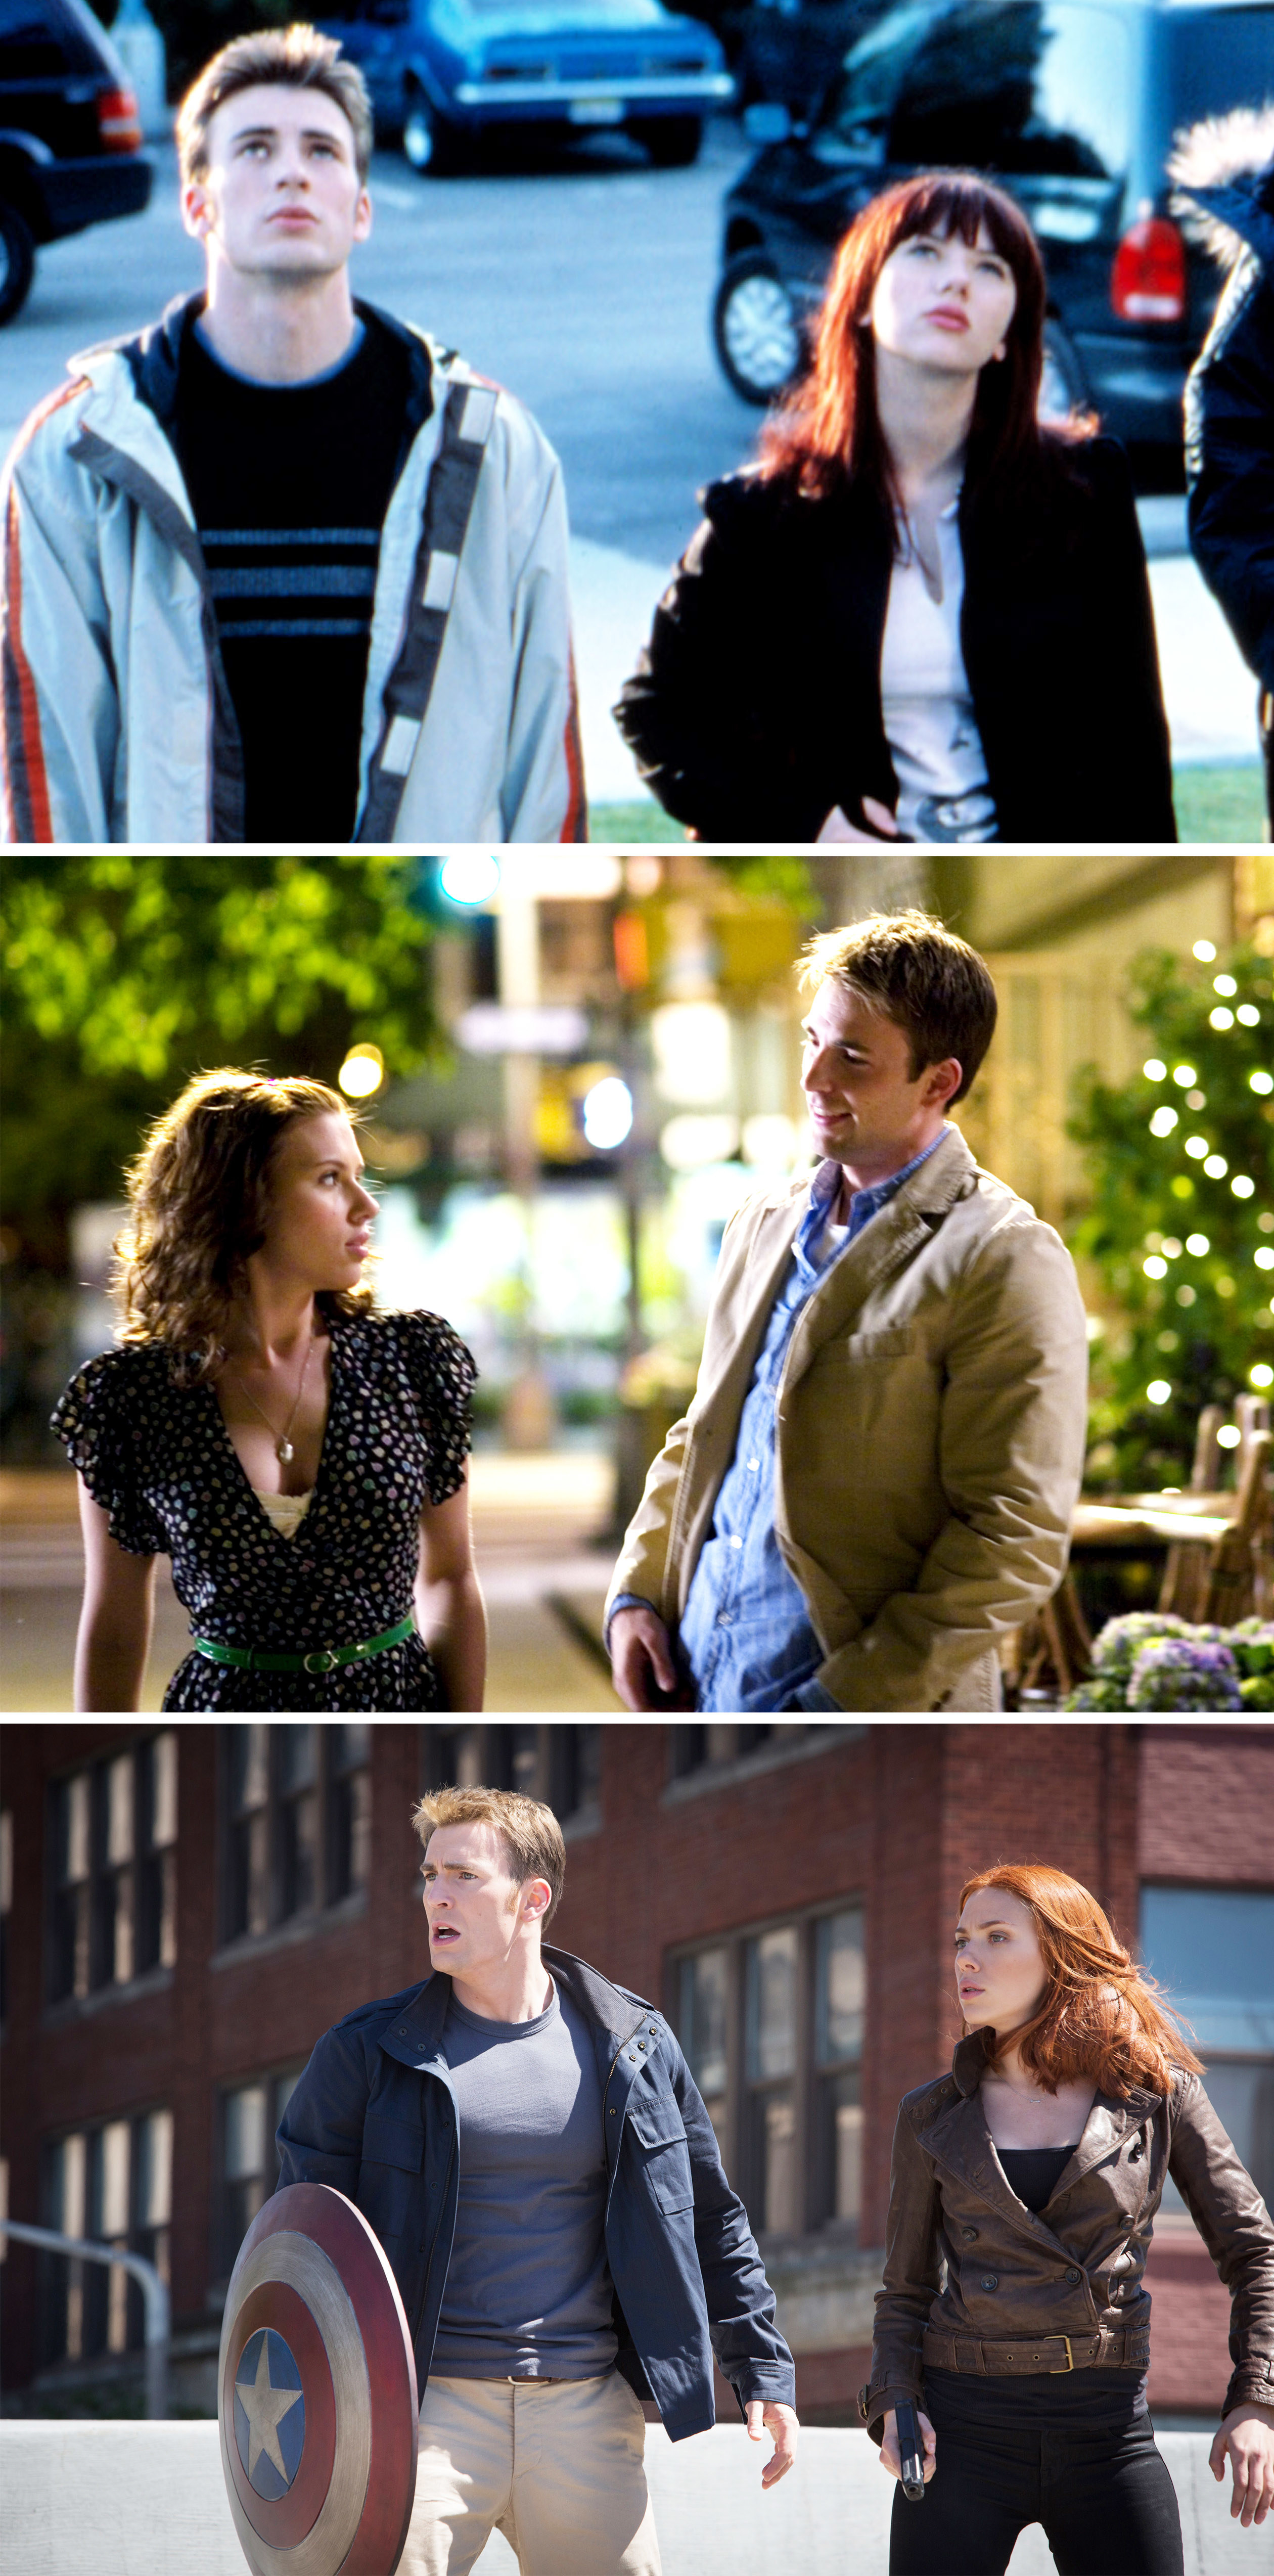 Screenshots of Chris and Scarlett in multiple movies together